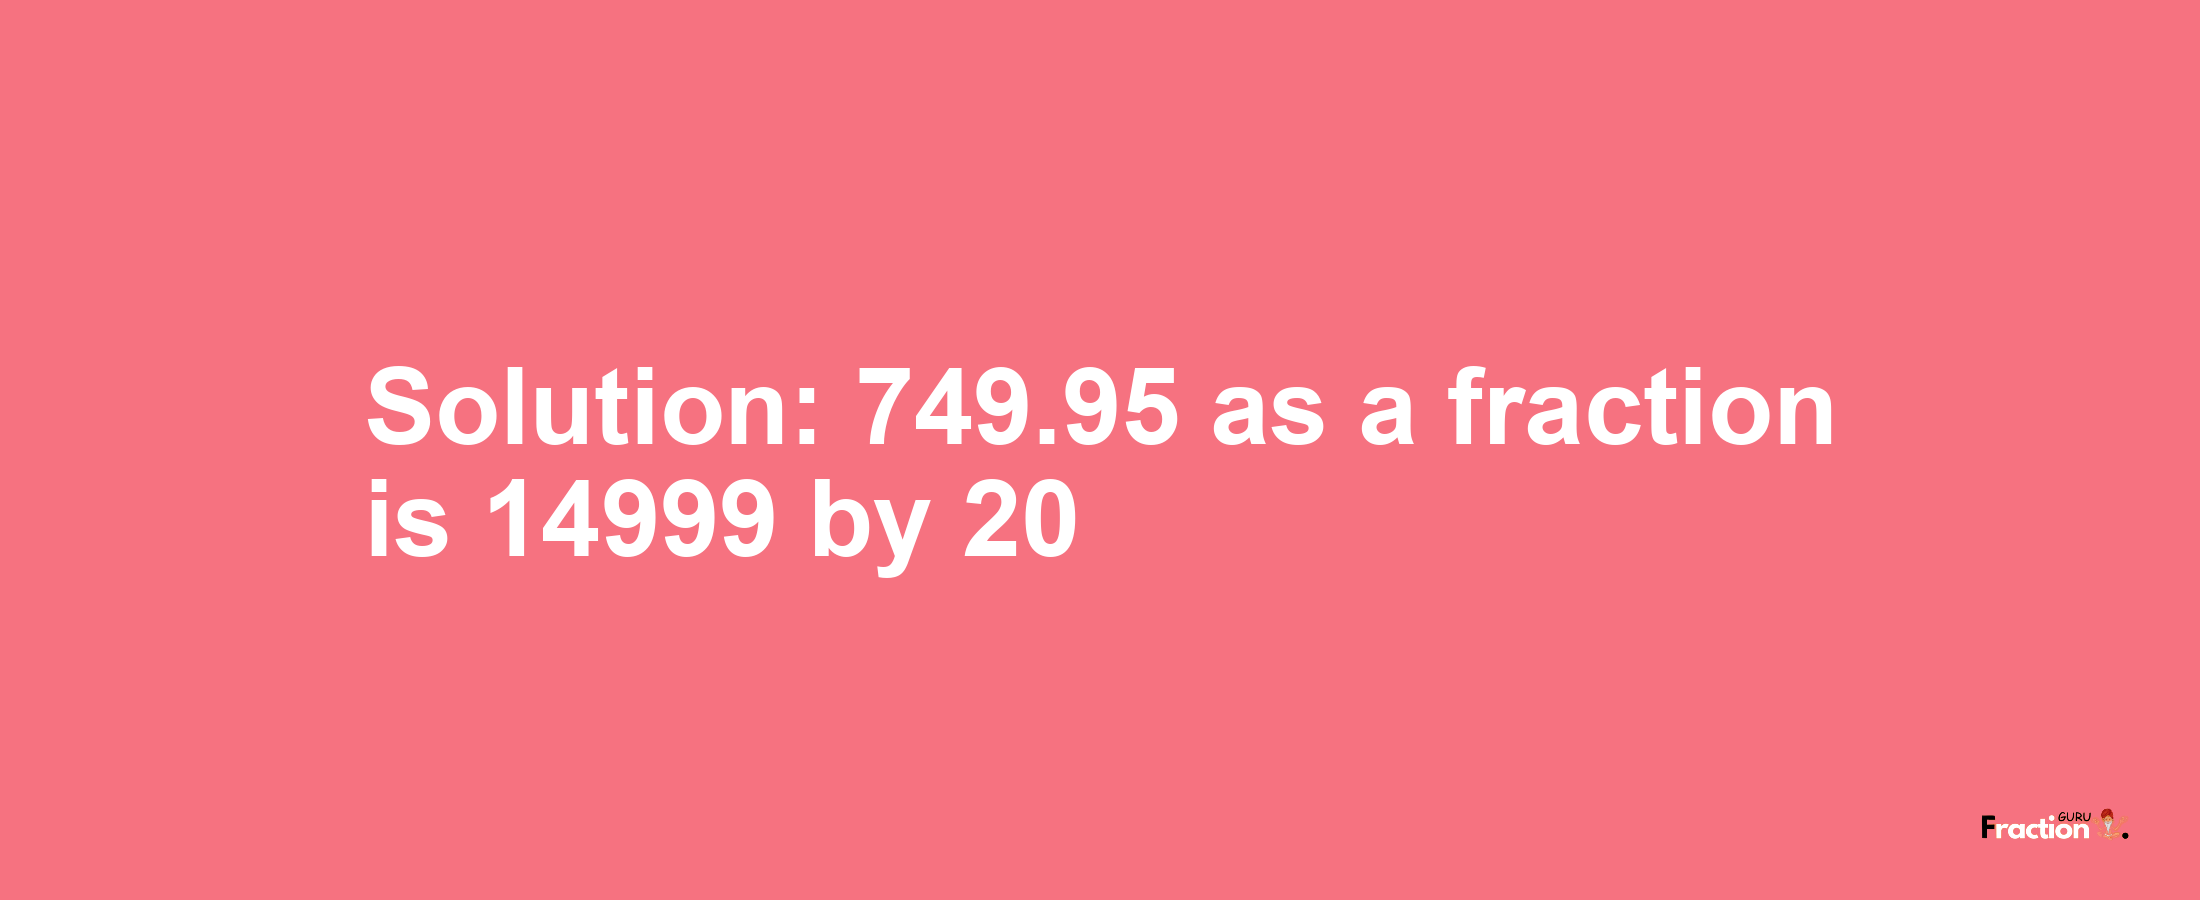 Solution:749.95 as a fraction is 14999/20